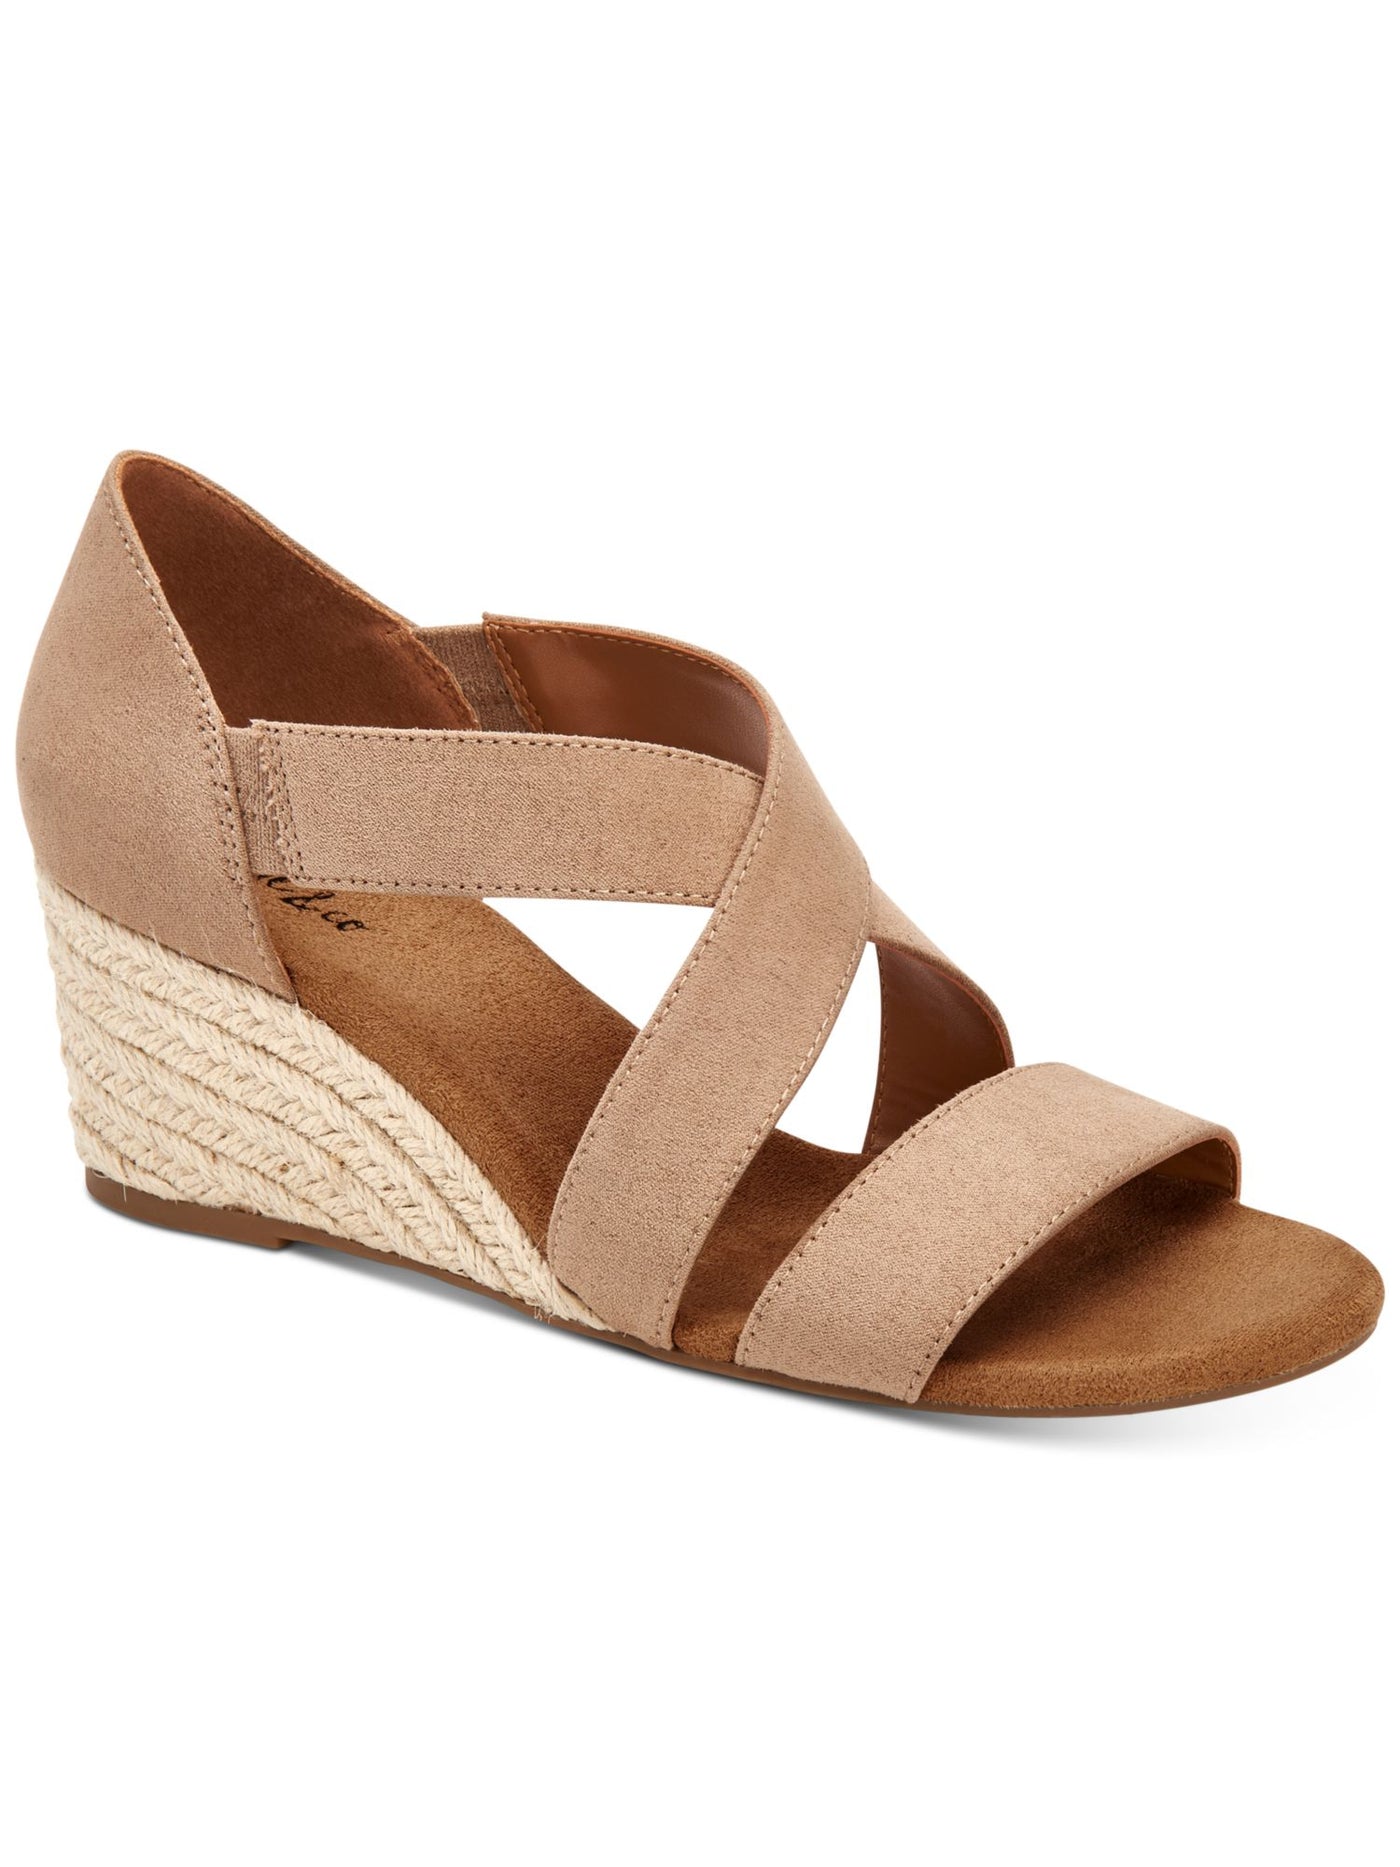 STYLE & COMPANY Womens Beige Padded Strappy Zaddie Almond Toe Wedge Slip On Espadrille Shoes 6 M